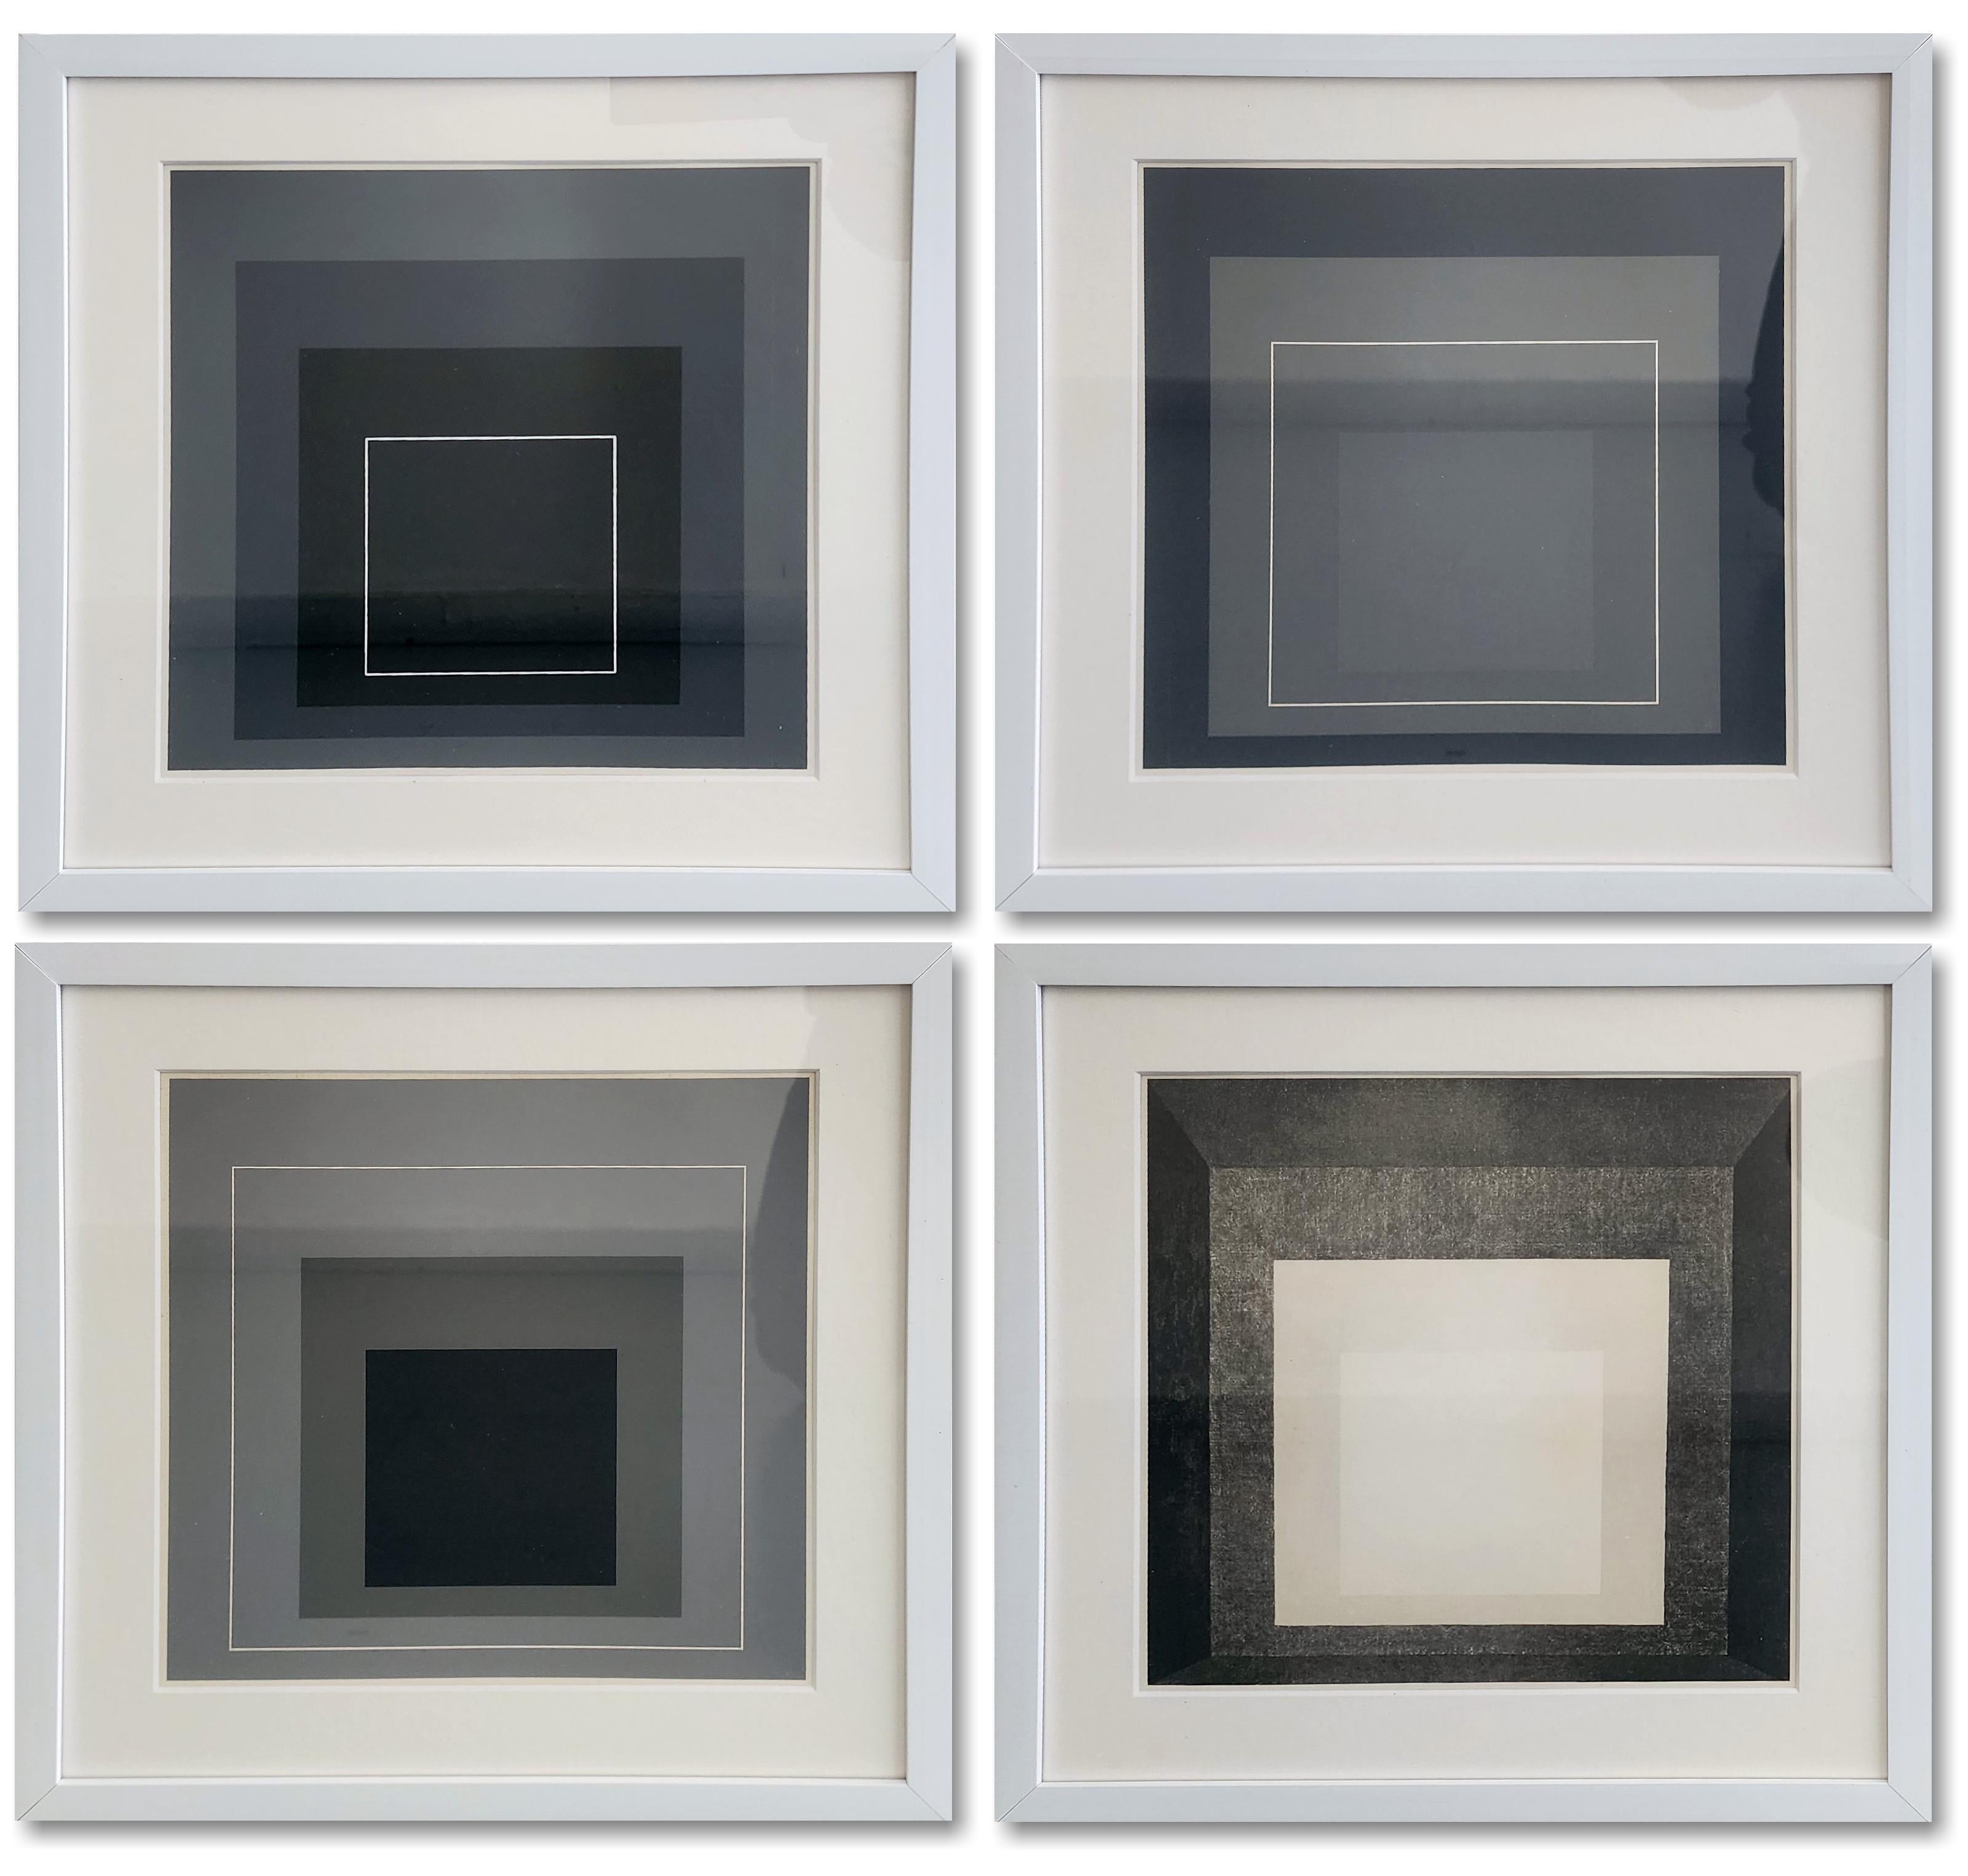 Homage to the Square (Hommage au Carre) - Set of Four (4) Screenprints (Bauhaus) - Print by (after) Josef Albers